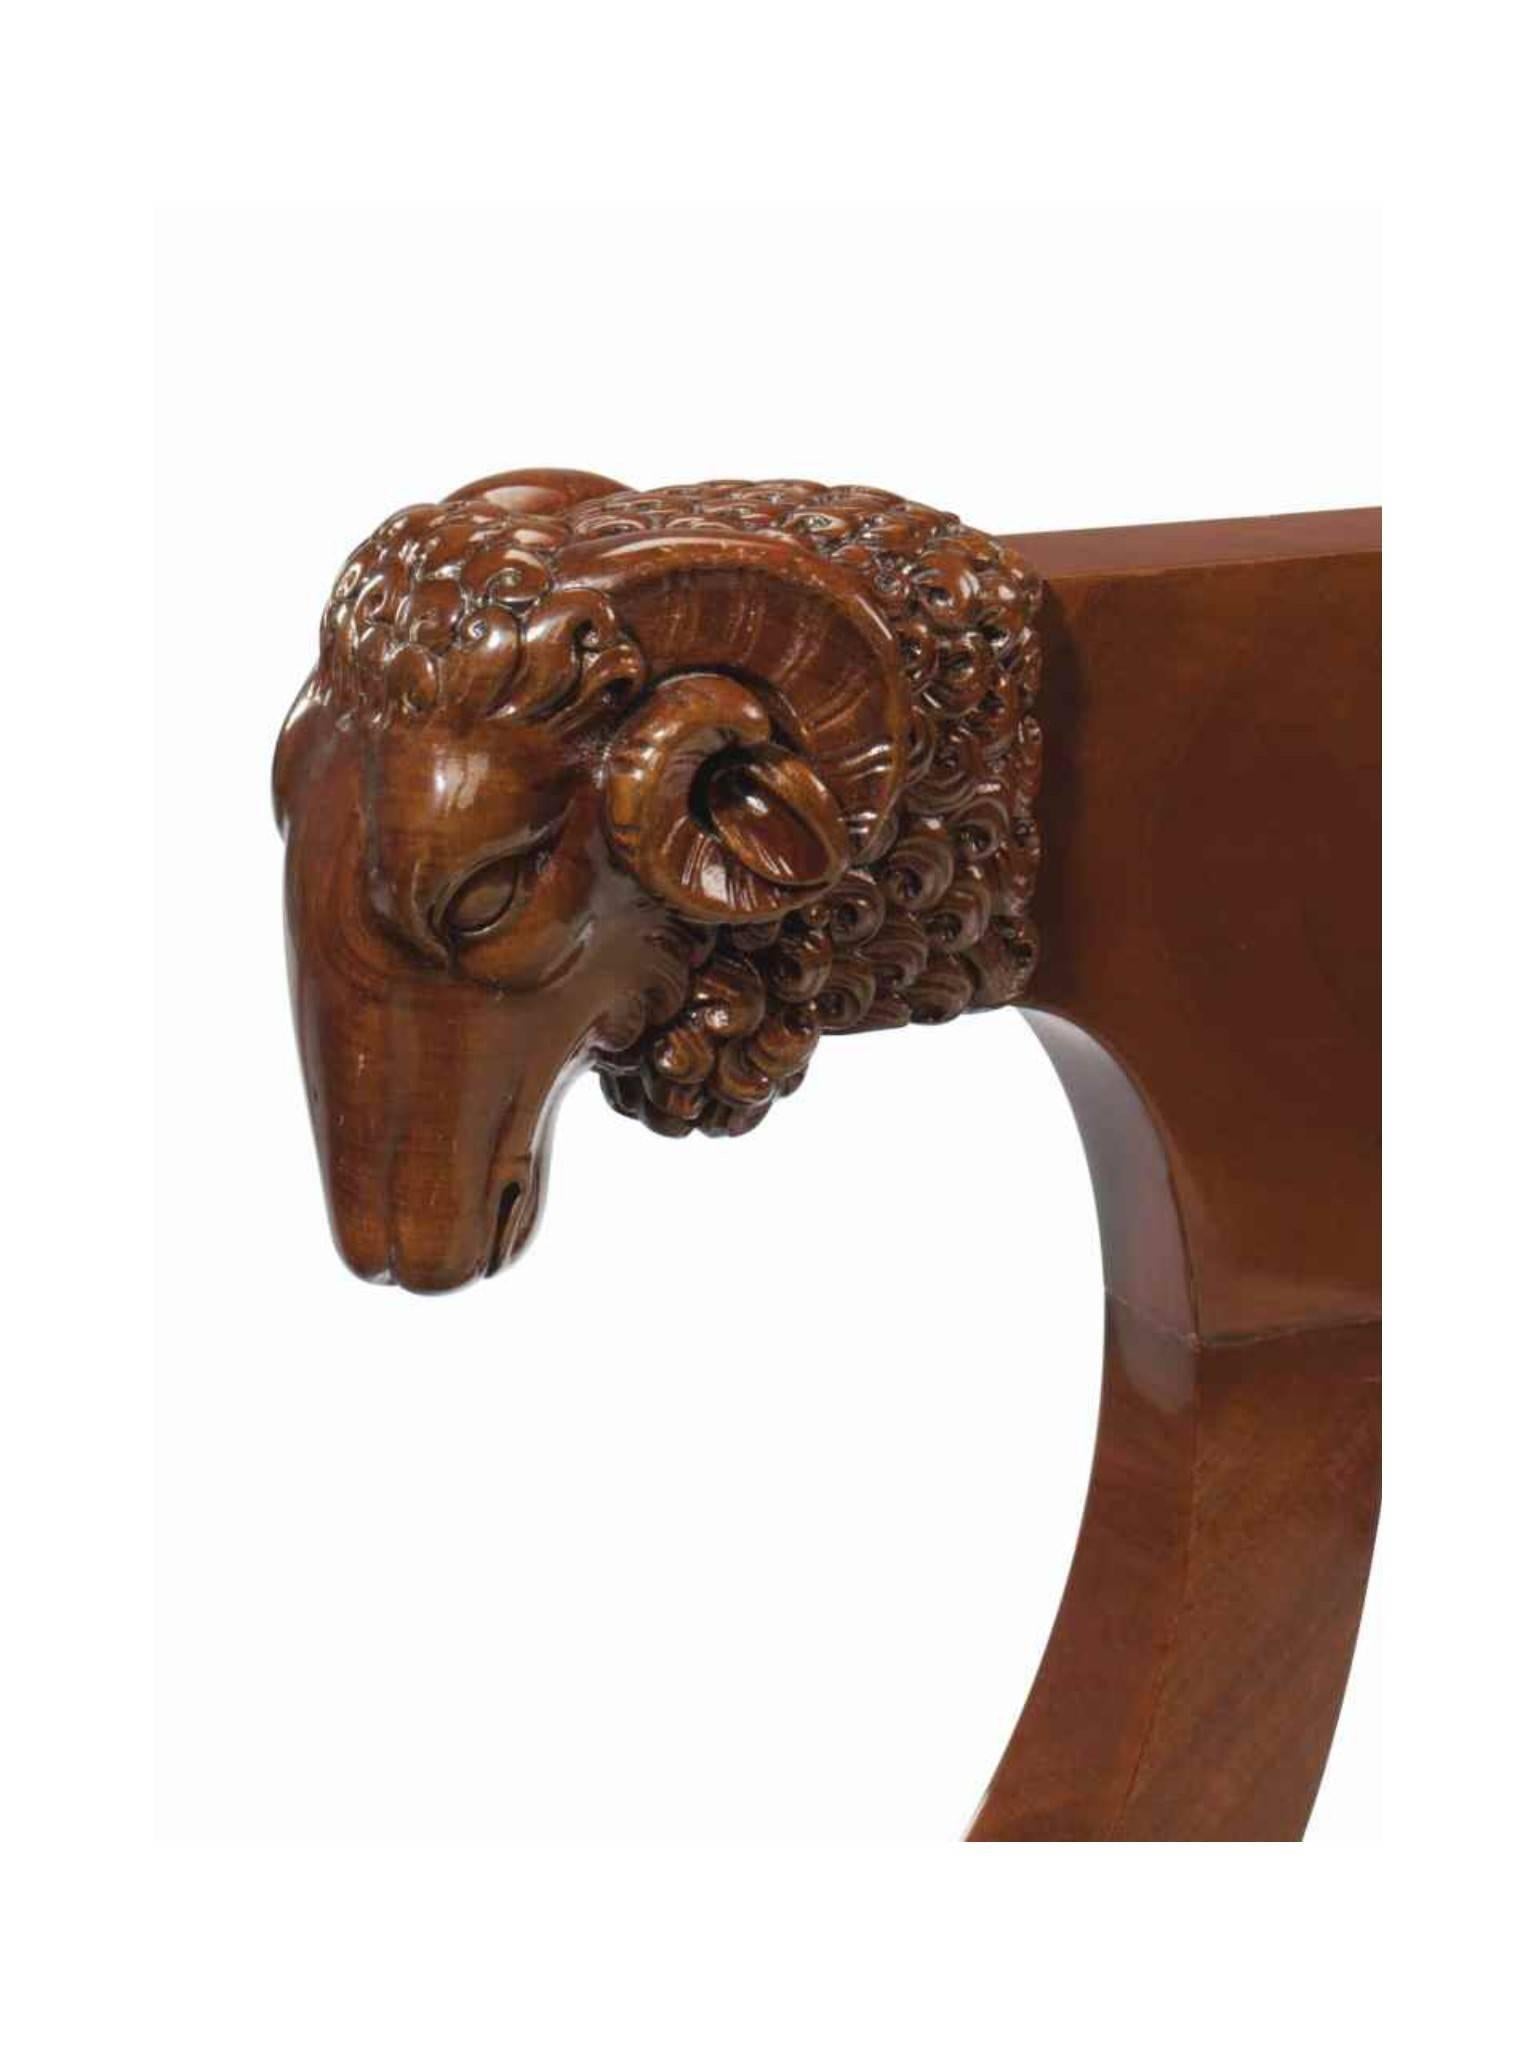 The early 19th century desk chair with ram's head arms and turned legs, is attributable to Jacob Desmalter and dates to circa 1805.